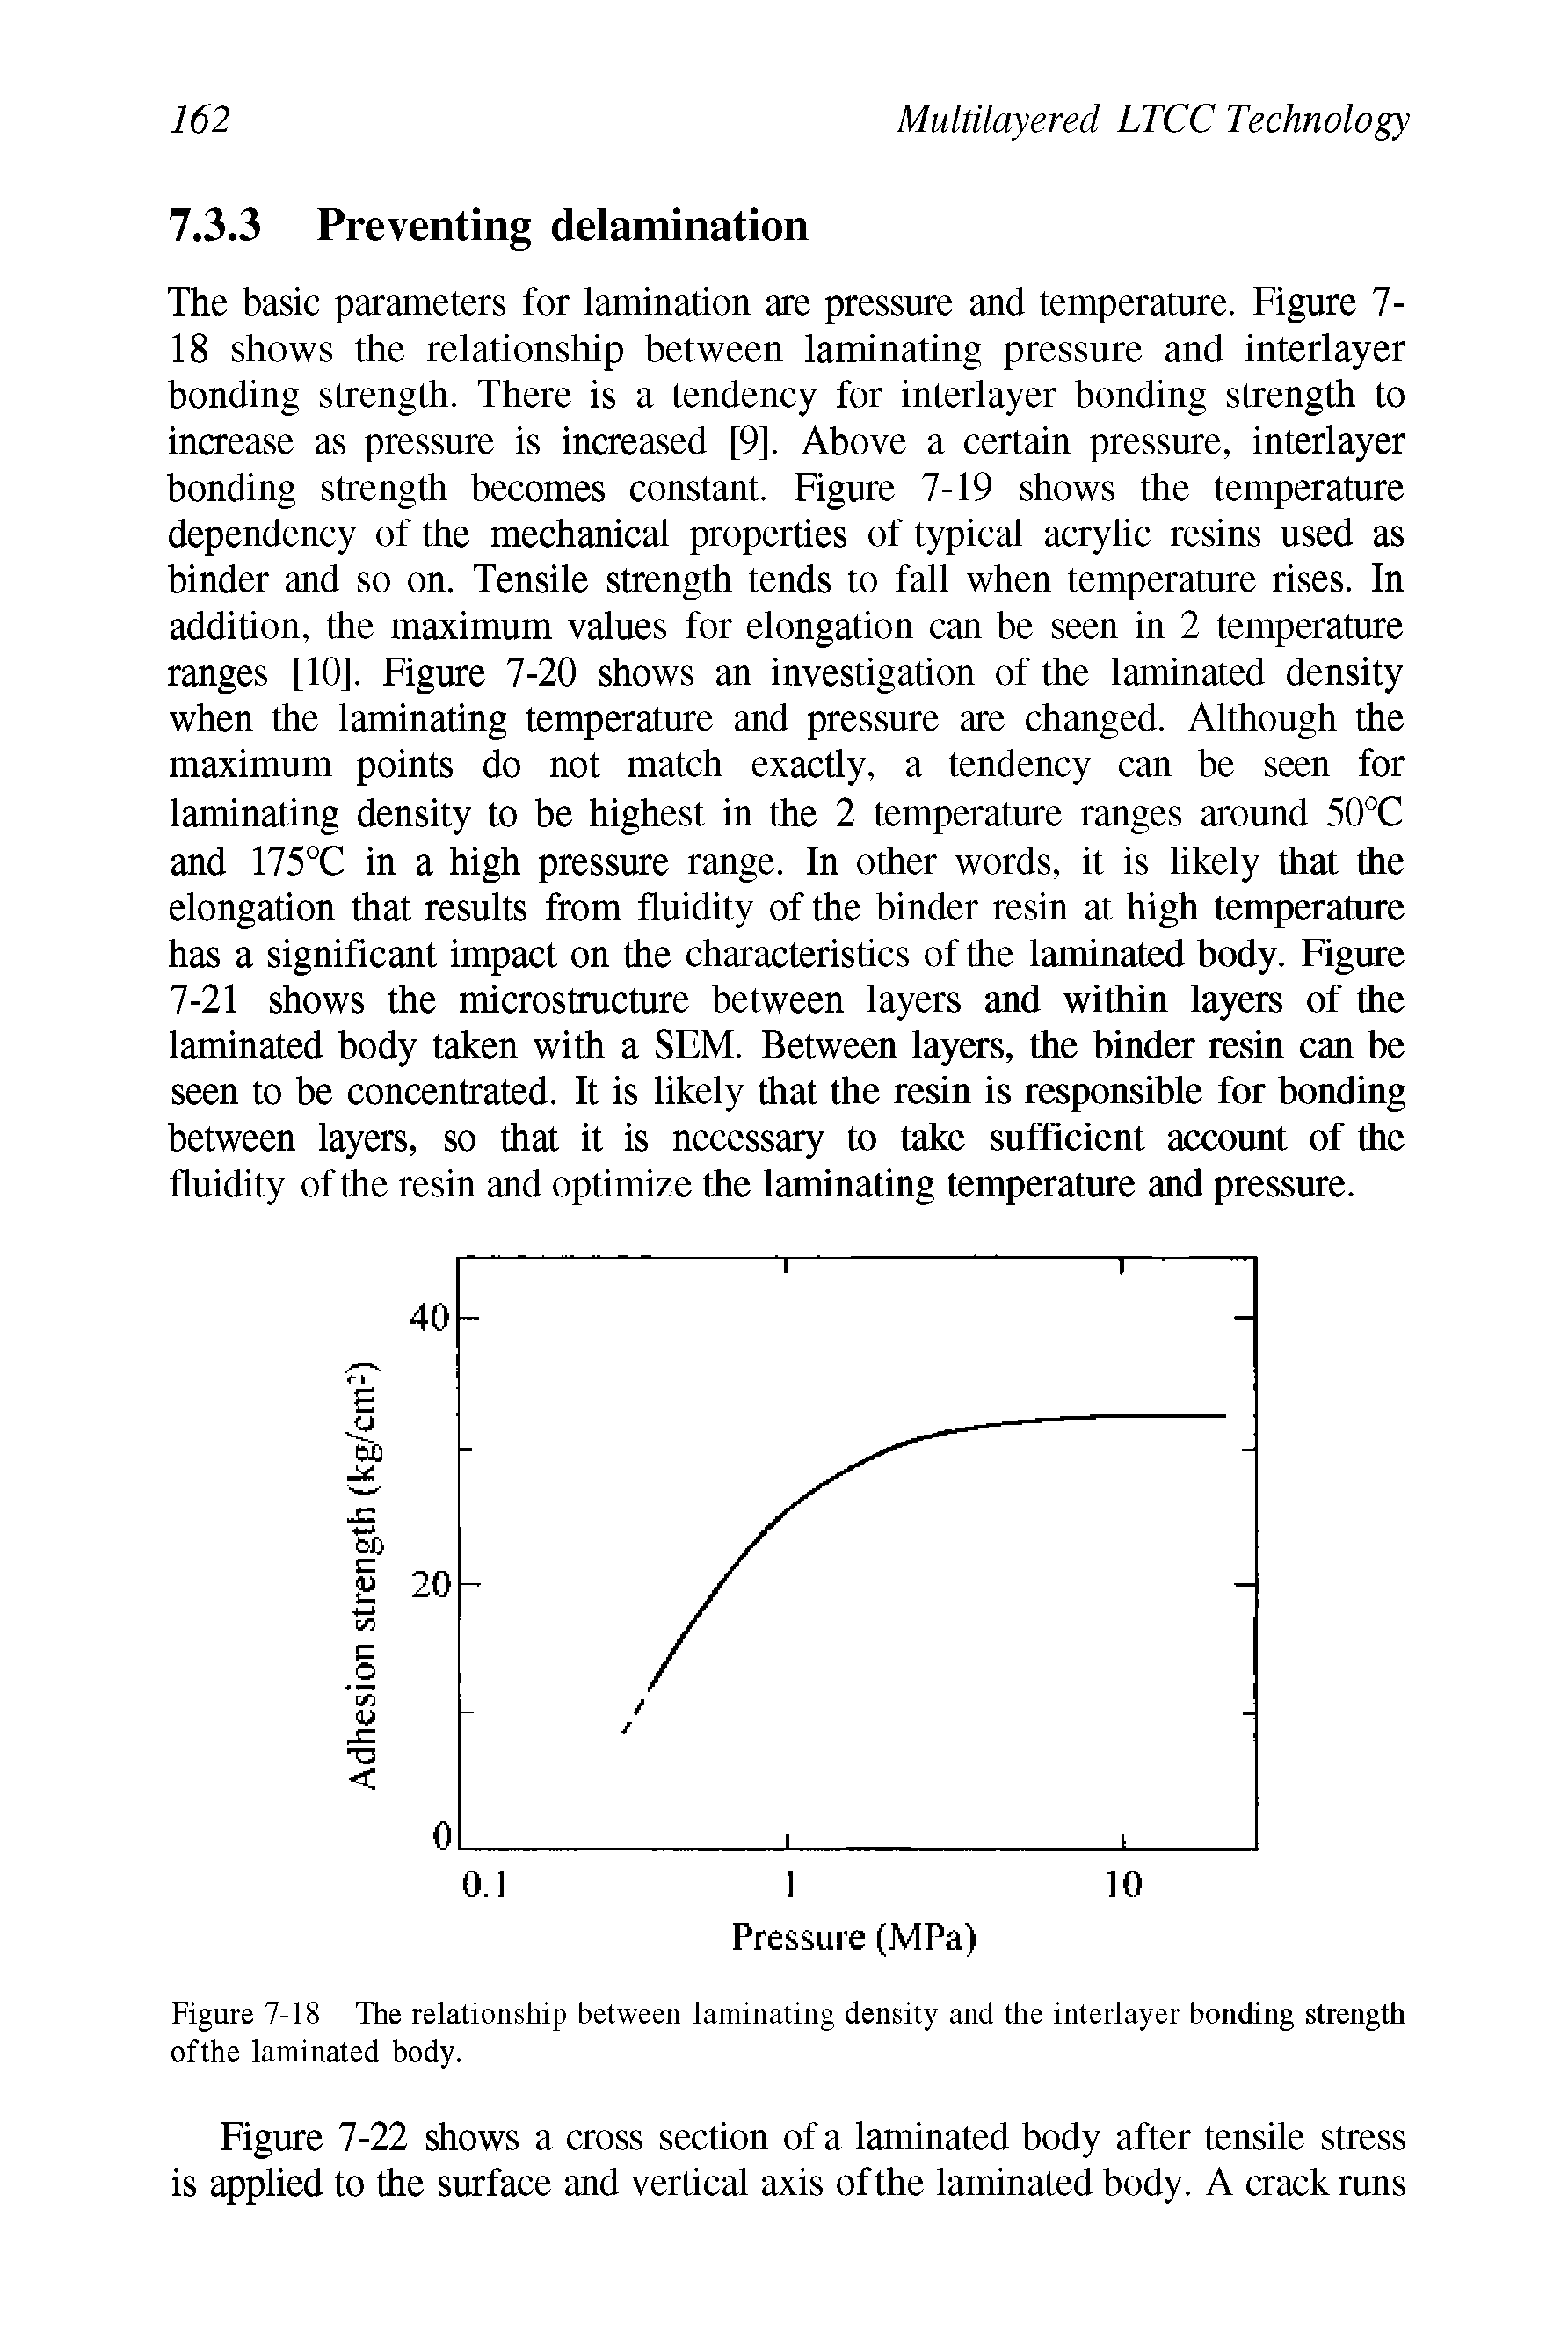 Figure 7-18 The relationship between laminating density and the interlayer bonding strength of the laminated body.